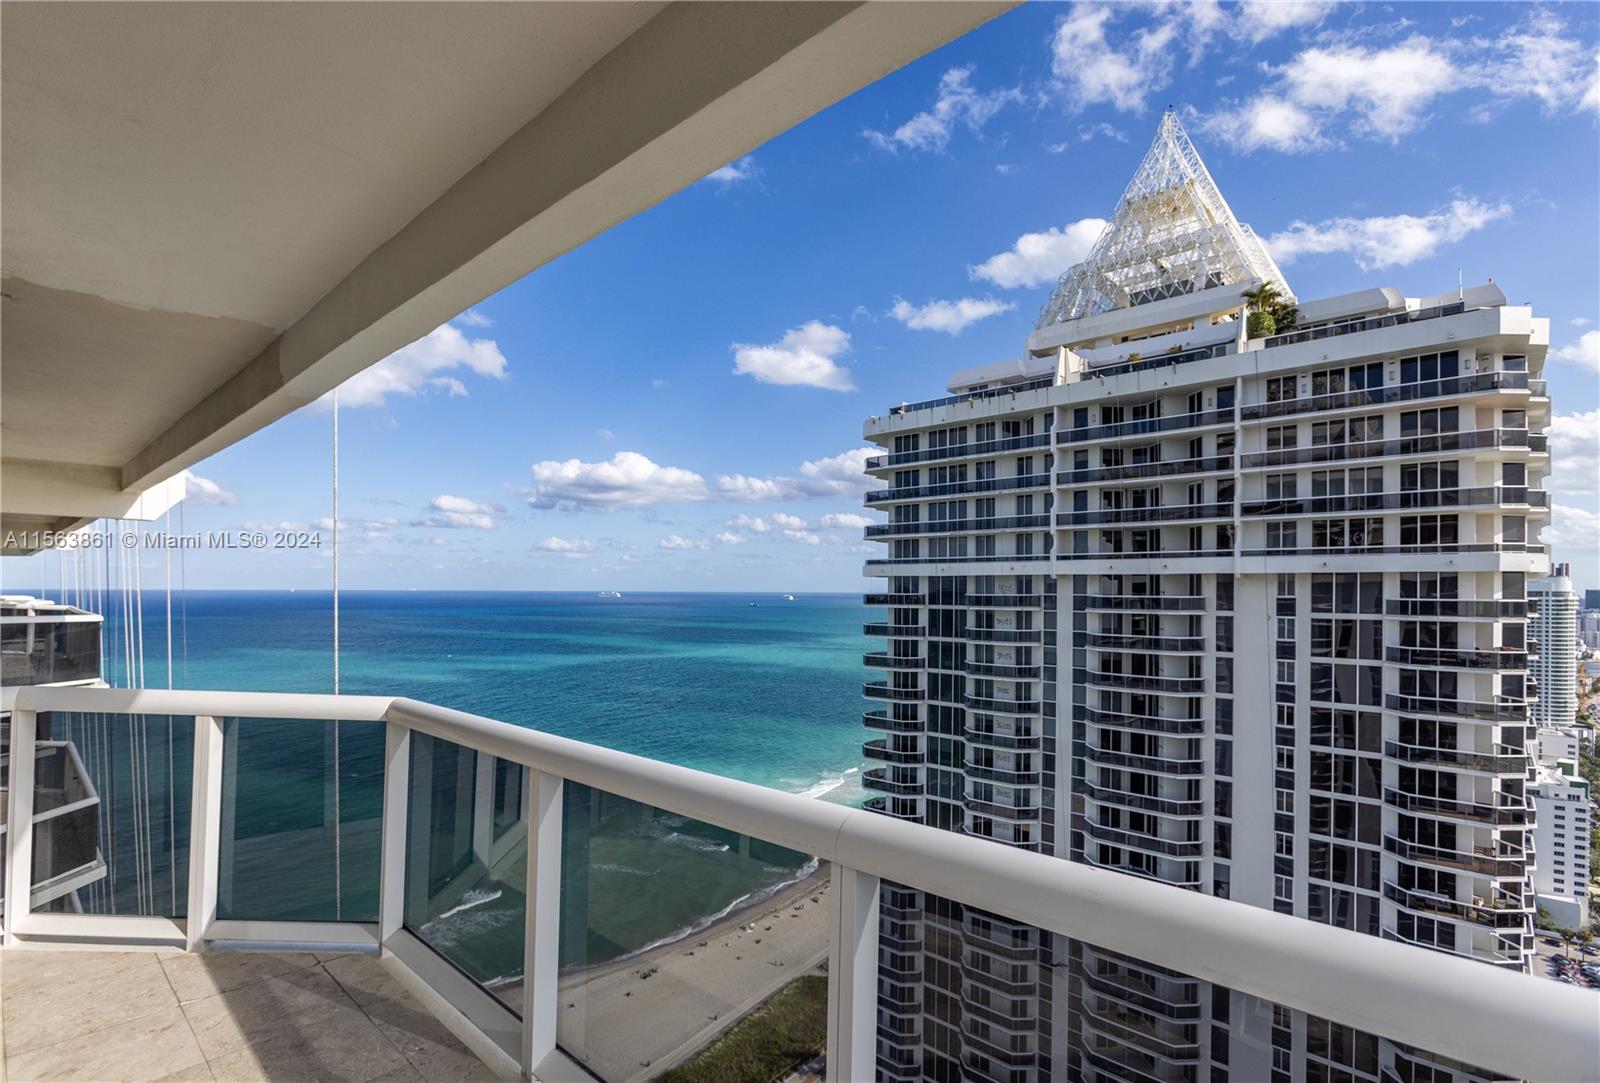 4779 SW Collins Ave #4005 For Sale A11563861, FL